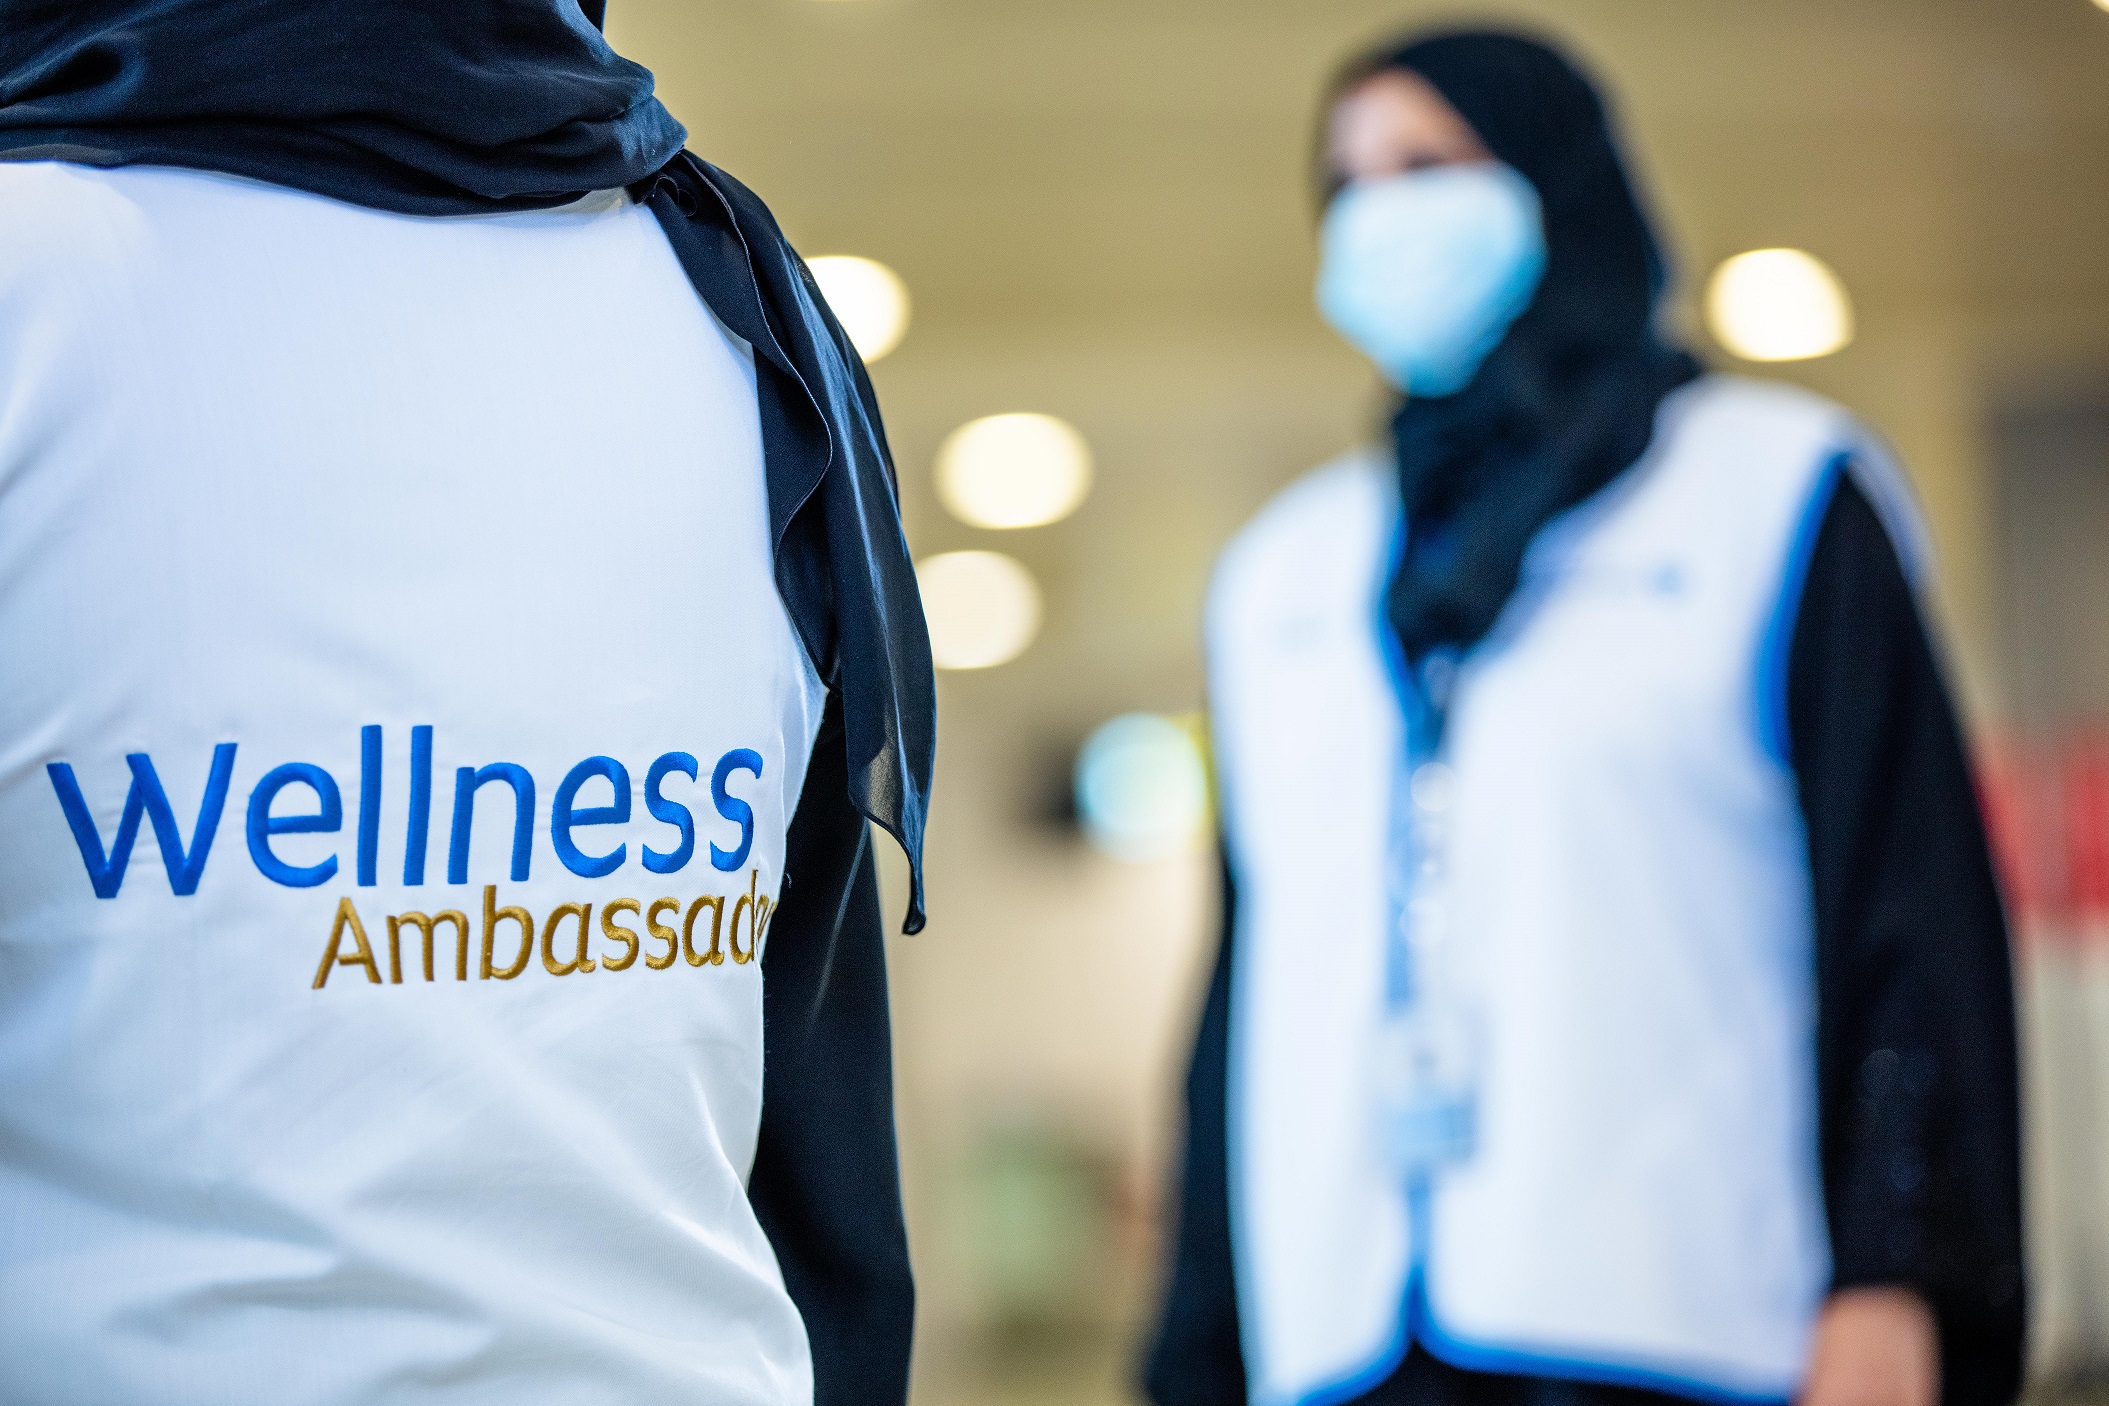 Wellness Ambassadors To Ensure The Health And Safety Of Passengers At Abu Dhabi International Airport